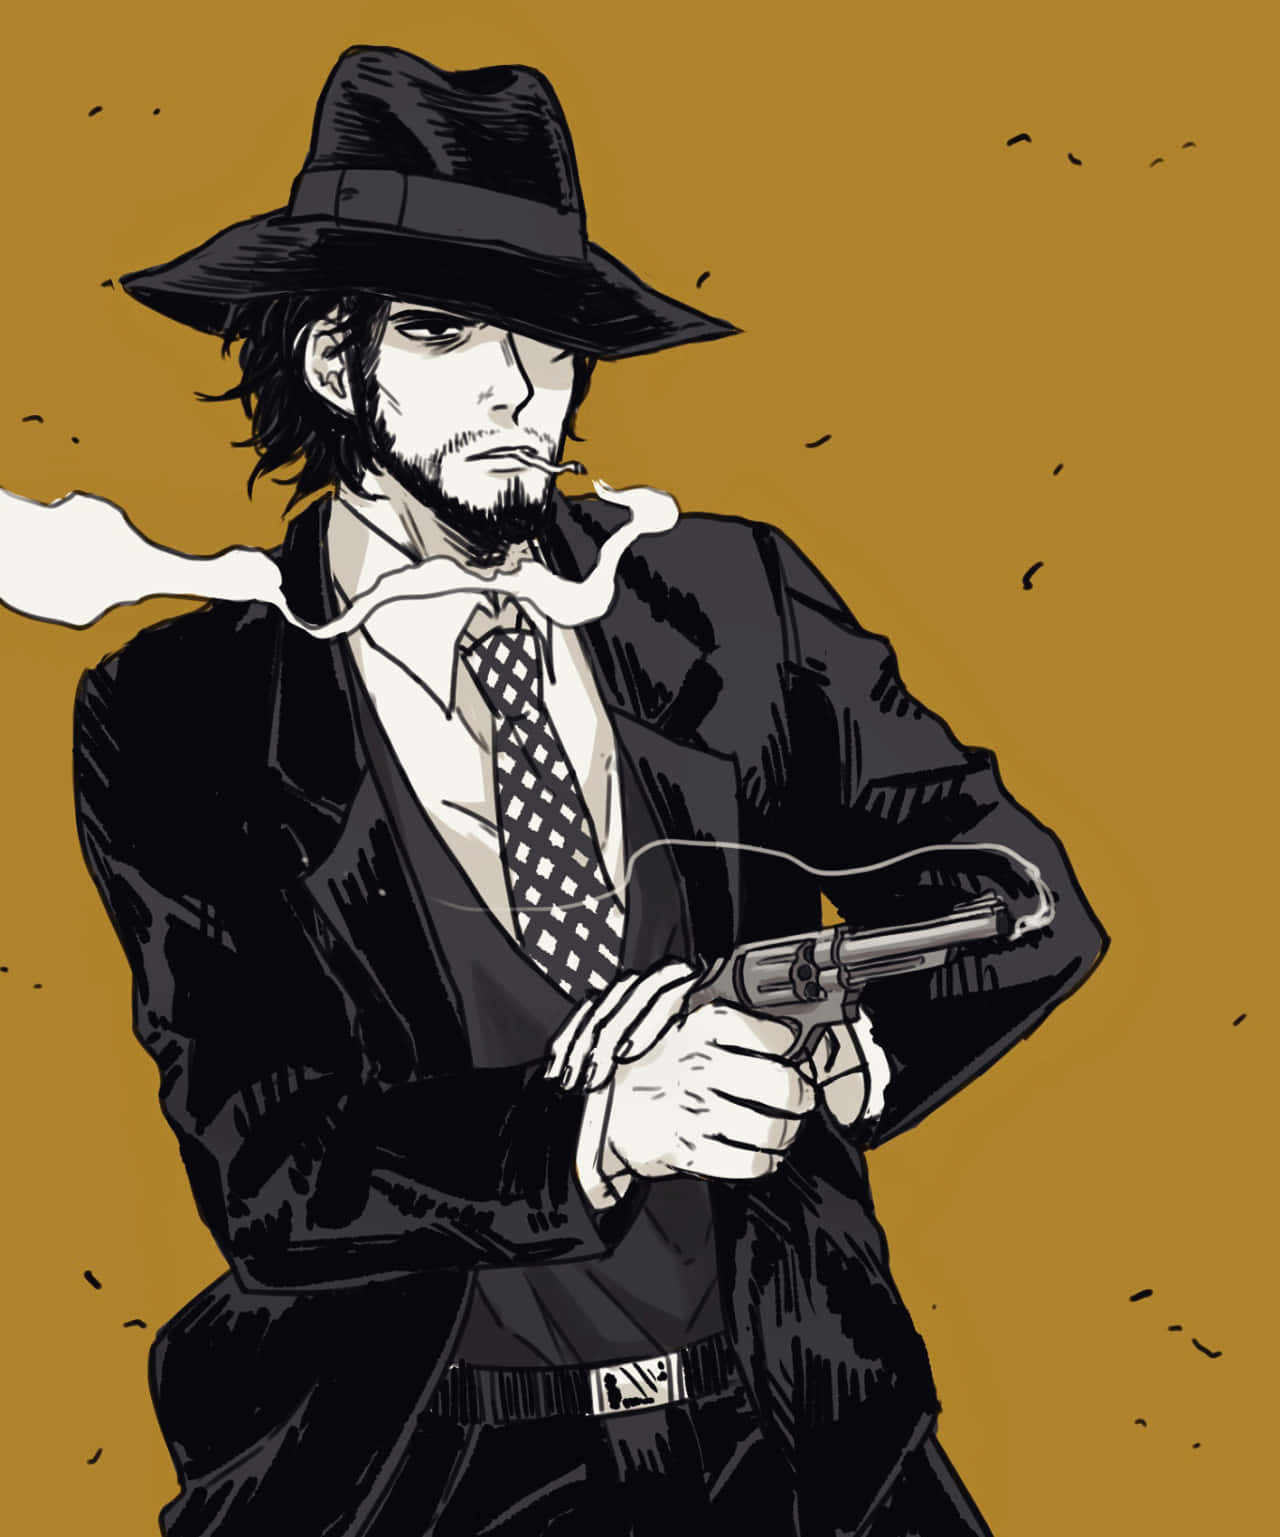 Daisuke Jigen from Lupin III in a Cool and Relaxed Pose Wallpaper